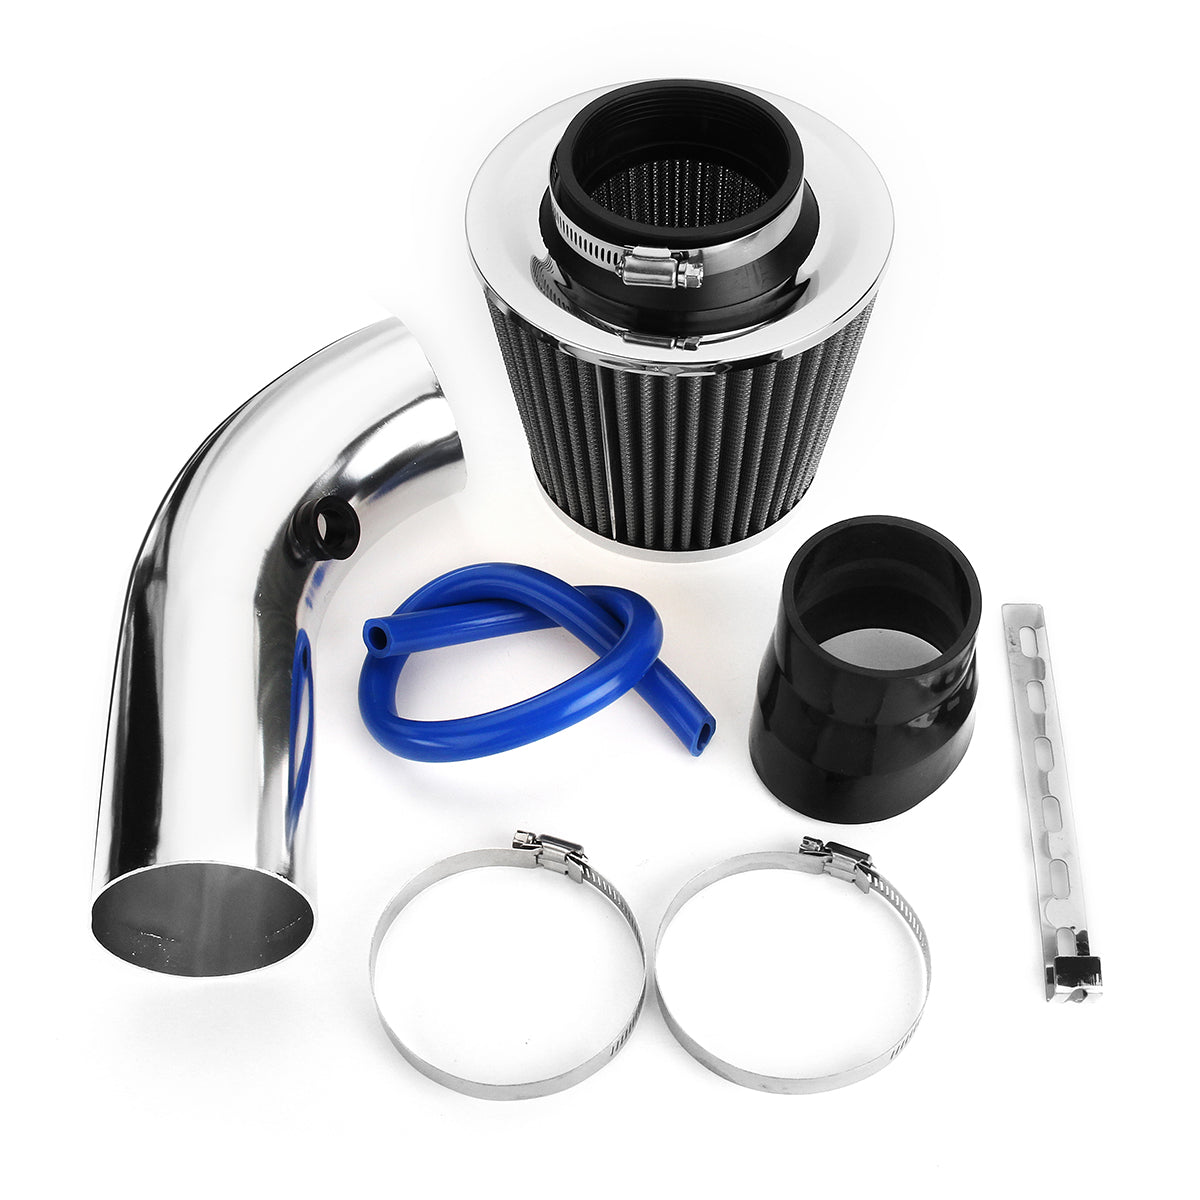 Dark Slate Blue 3 Inch Universal Car Cold Air Intake Filter Aluminum Induction Kit Pipe Hose System Silver